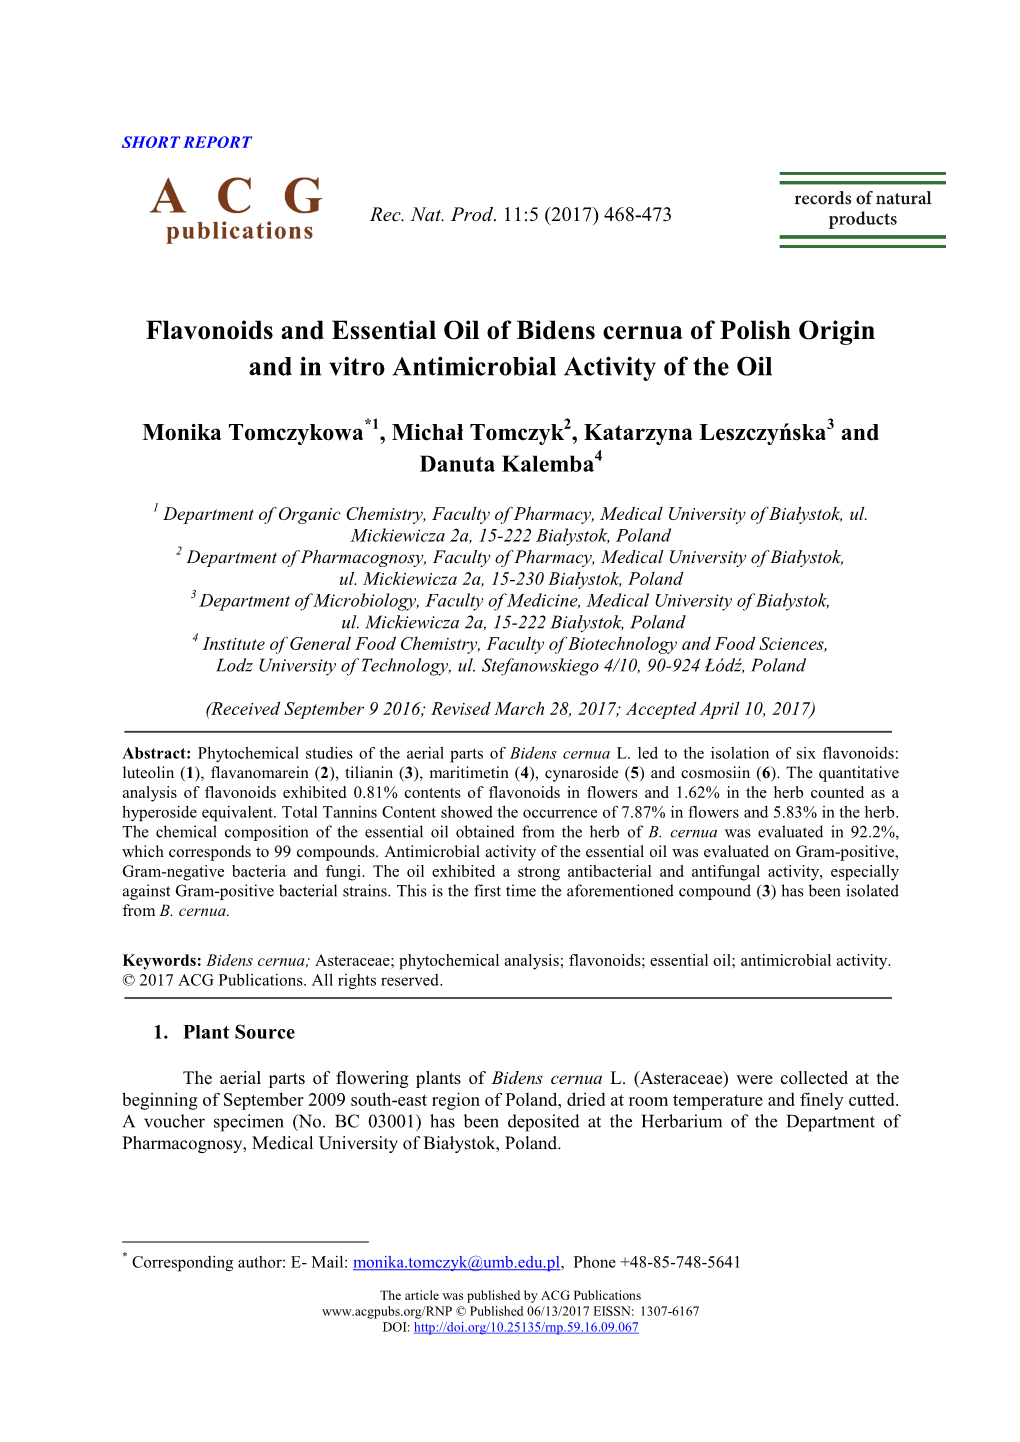 Flavonoids and Essential Oil of Bidens Cernua of Polish Origin and in Vitro Antimicrobial Activity of the Oil